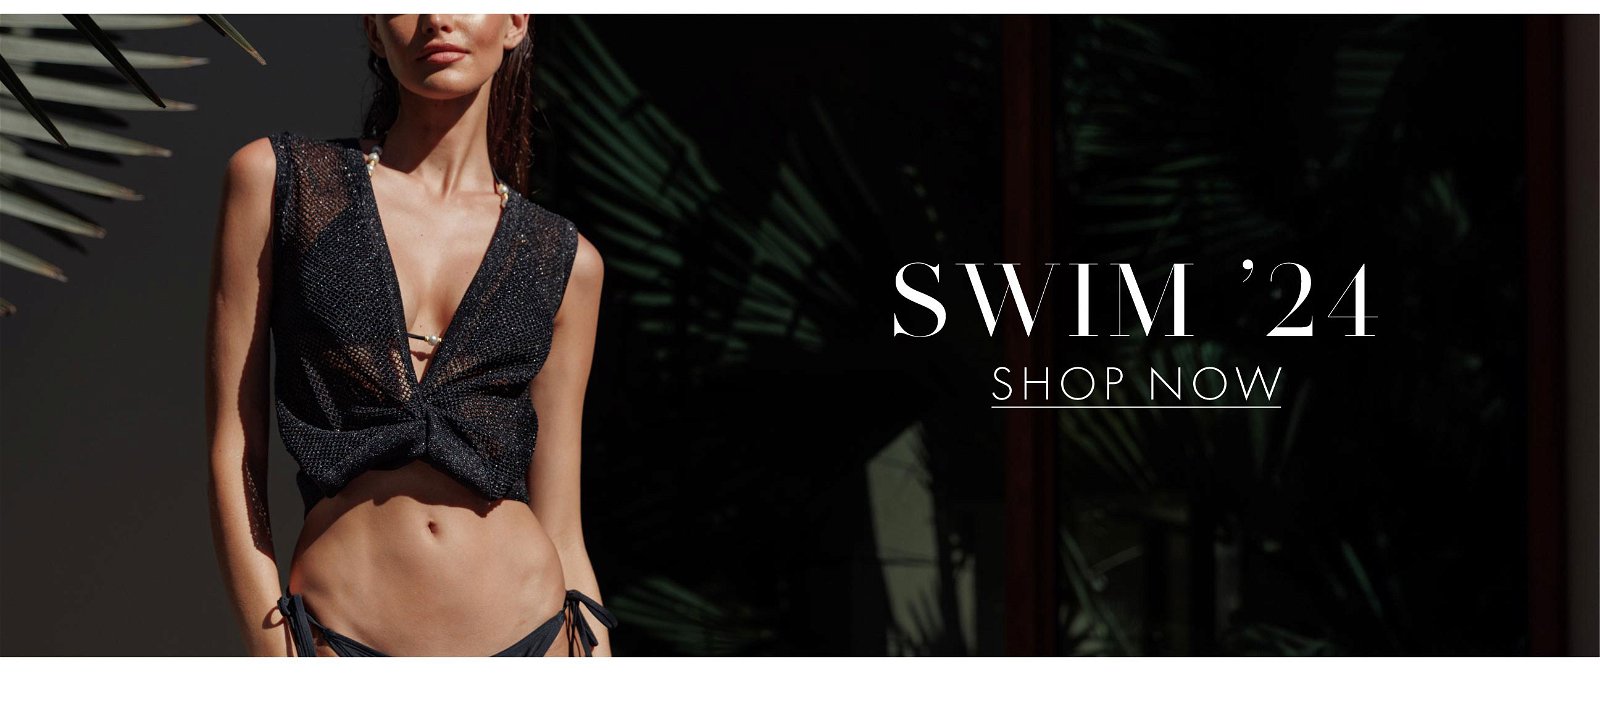 Swimwear Collection >> Shop Now